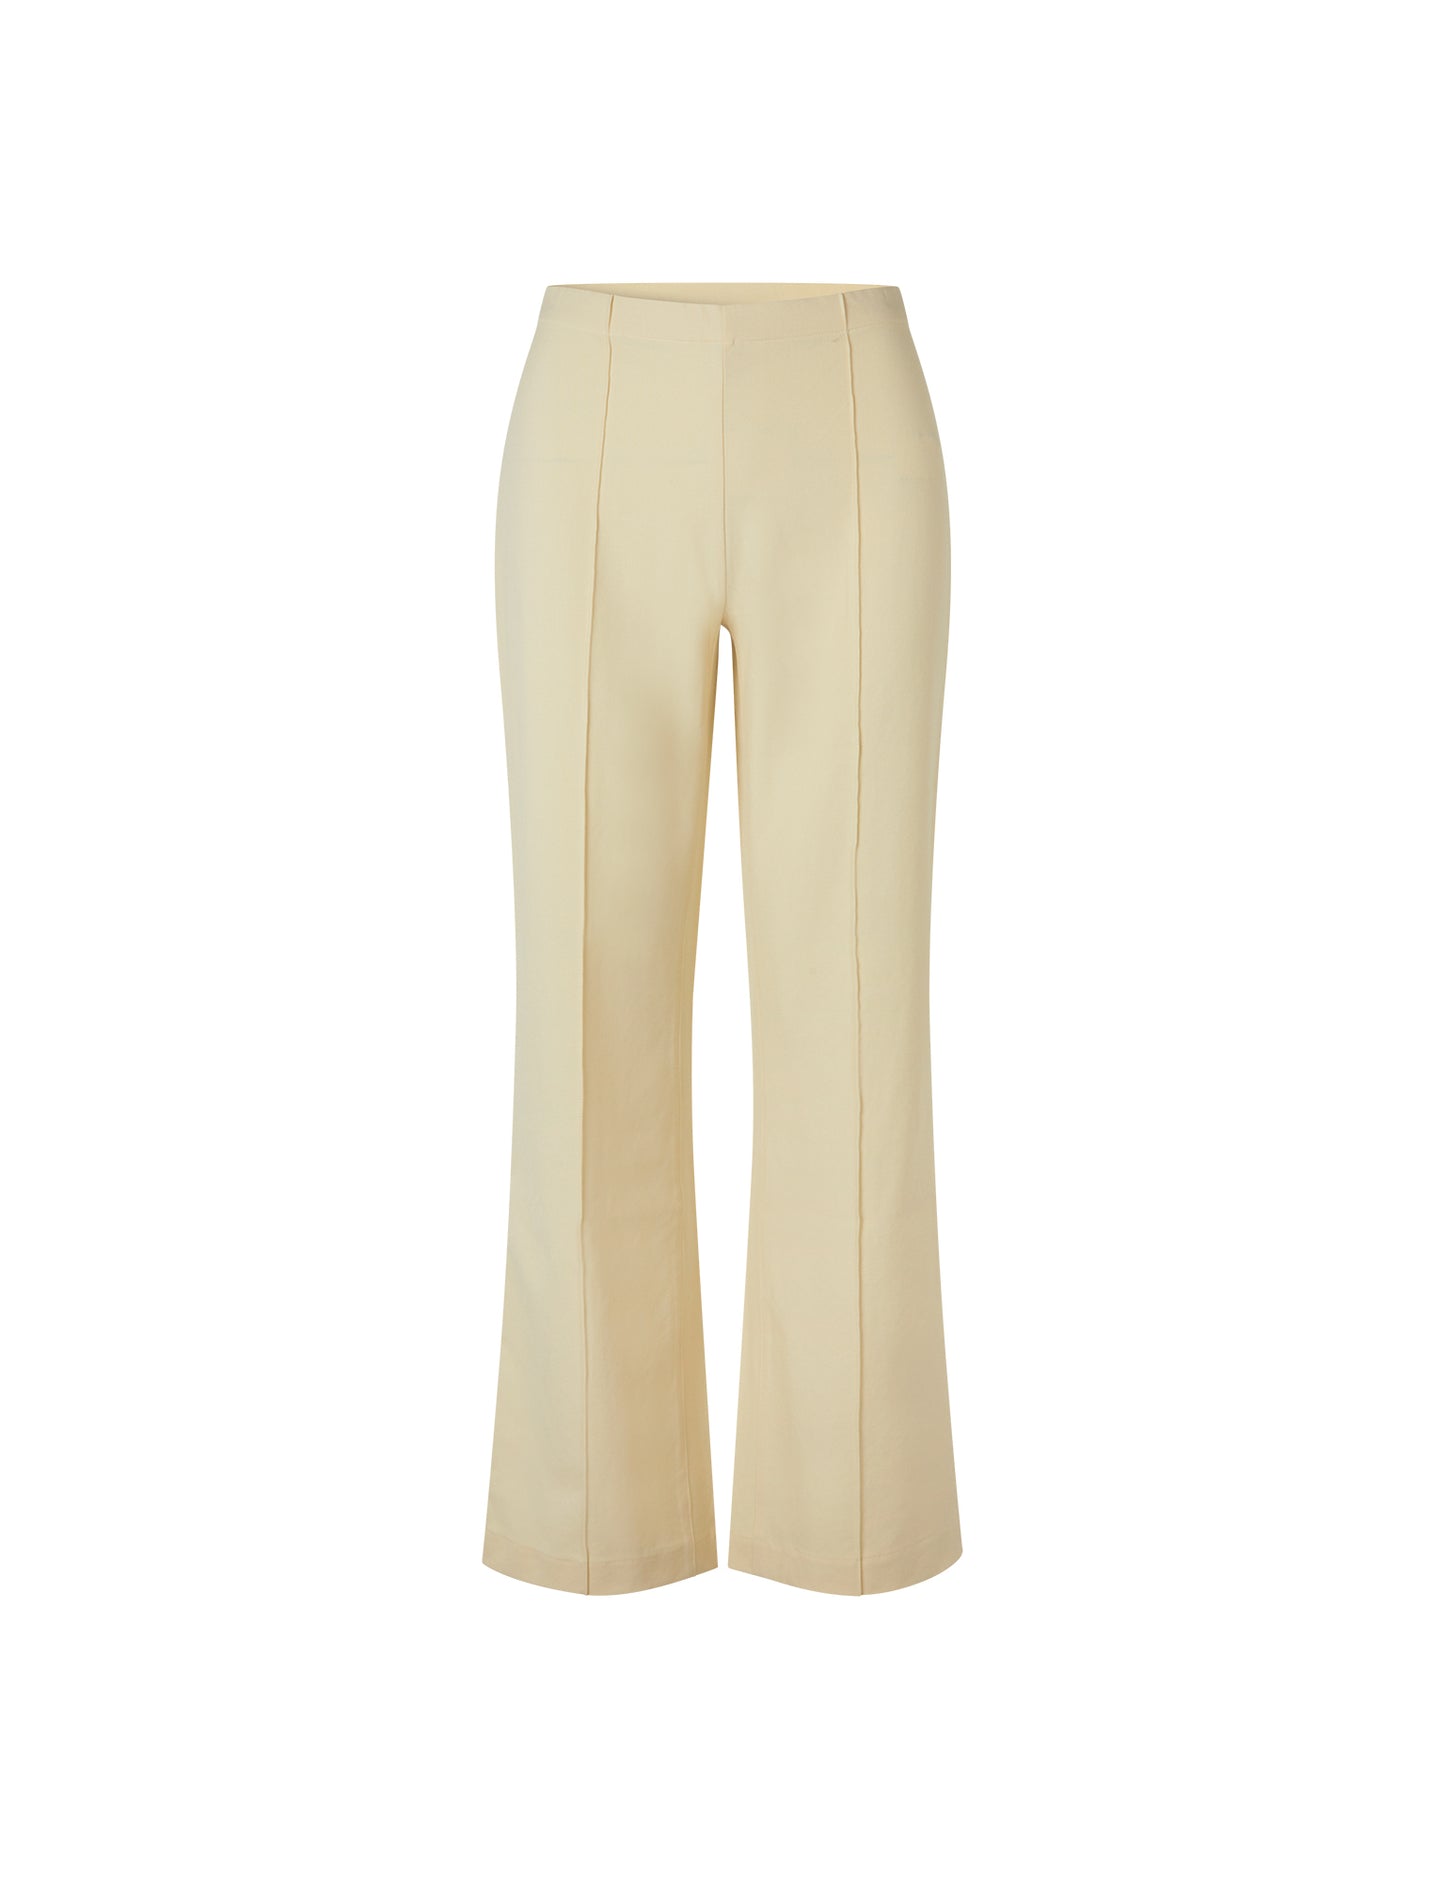 Mads Nørgaard Recycled Sportina Pirla Pants Double Cream